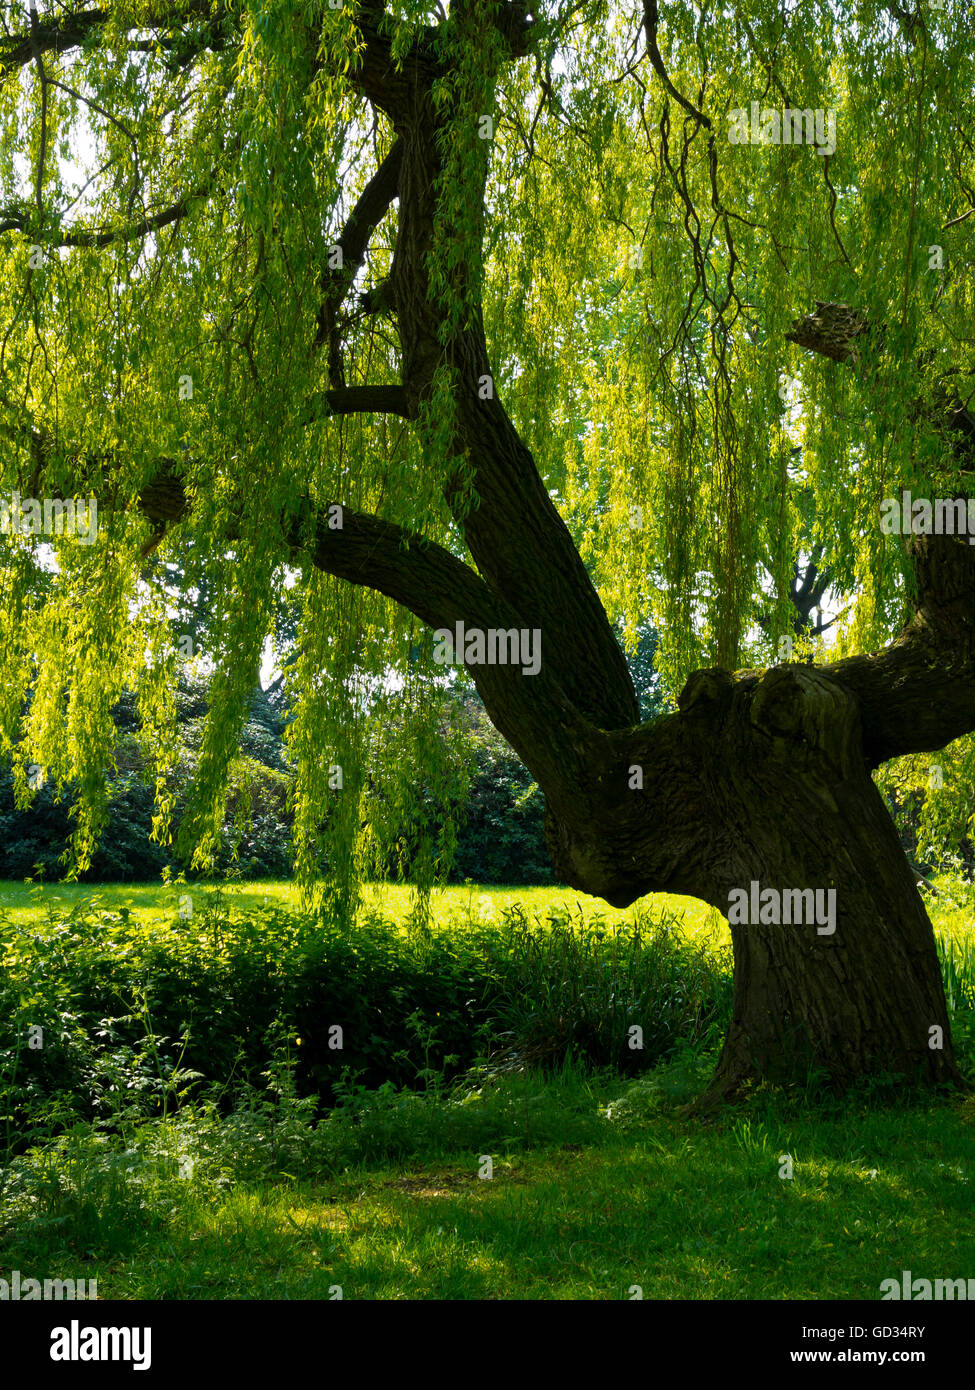 Willow tree genus Salix a deciduous tree growing next to a stream with sunlight through the branches Stock Photo